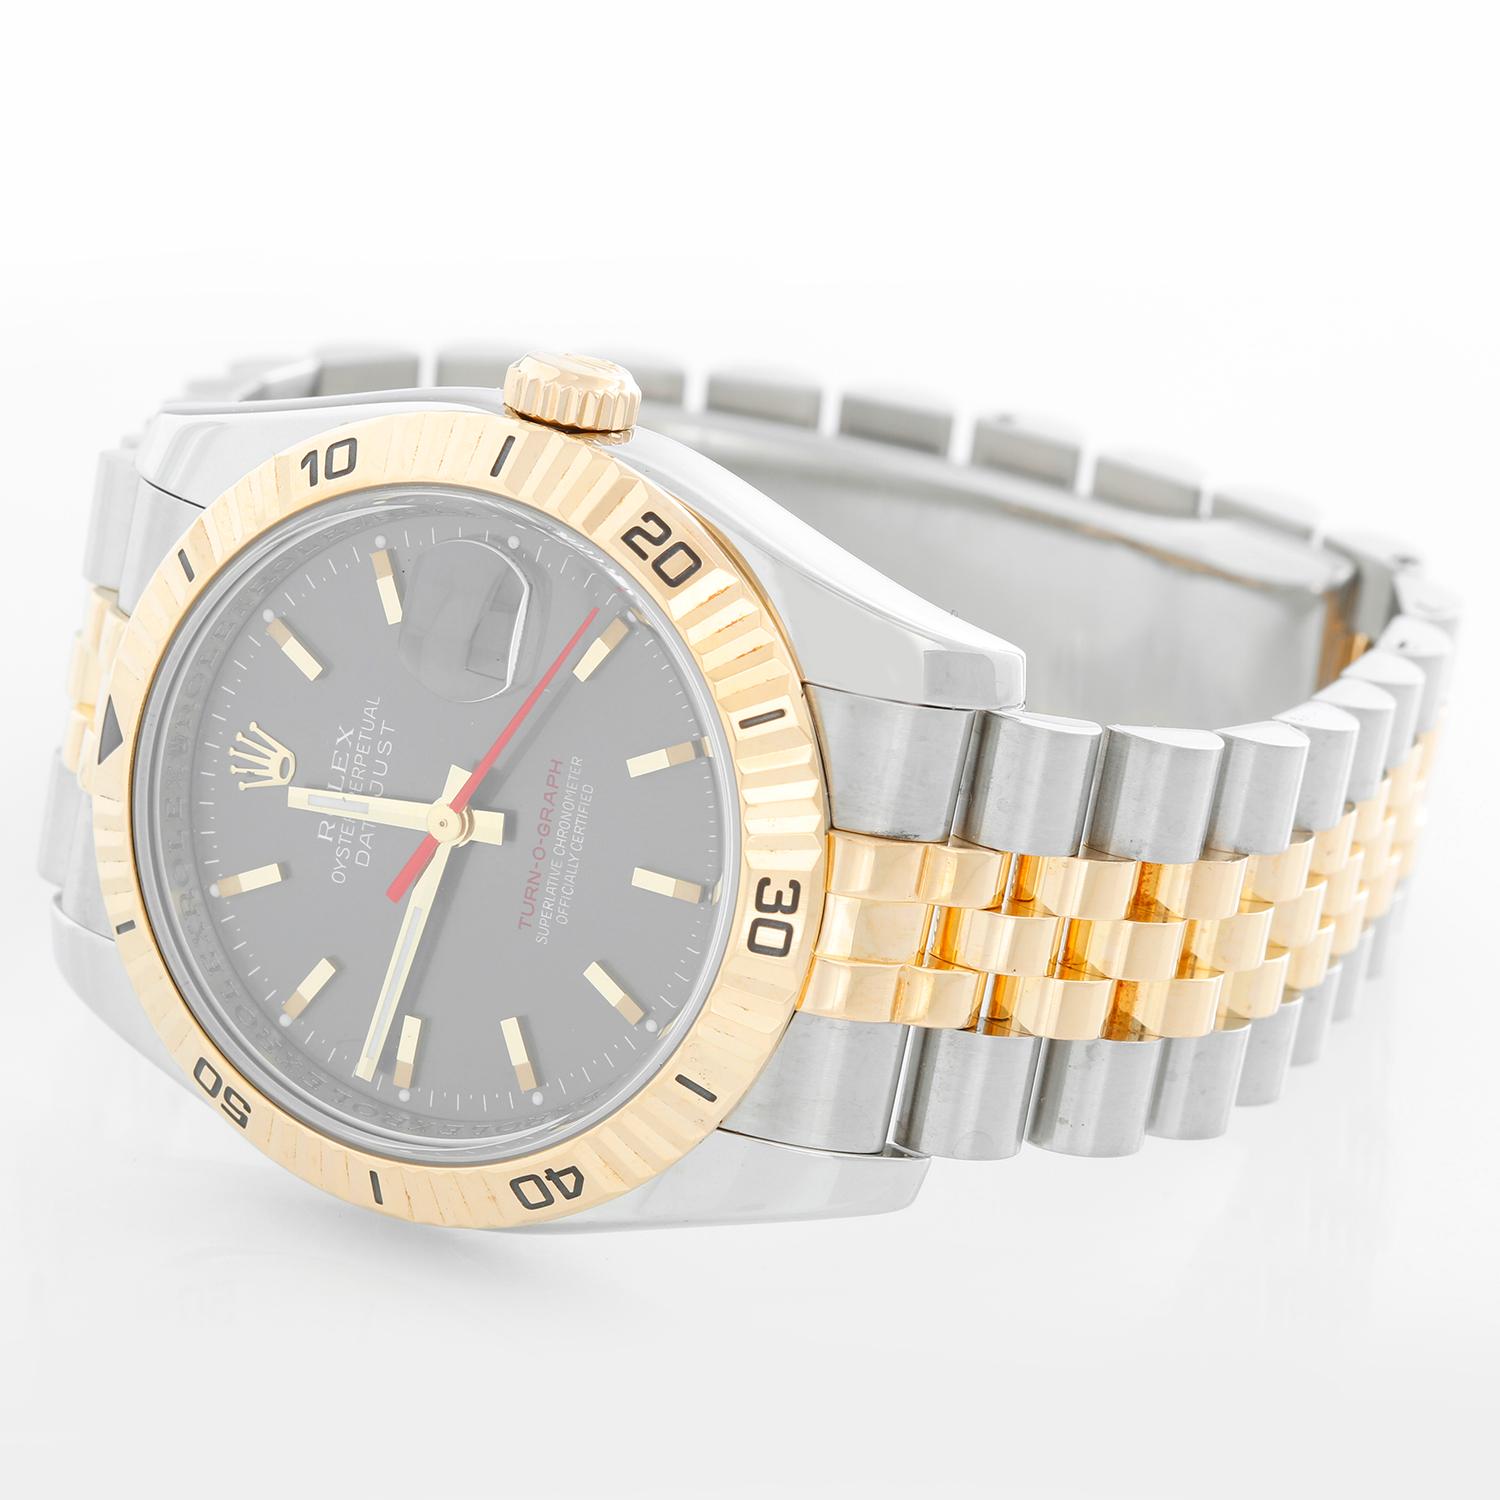 Rolex 2-Tone Turnograph Men's Steel & Gold Watch Slate Dial 116263 - Automatic winding with date; sapphire crystal; 31 jewels. Stainless steel case with 18k yellow gold rotating Thunderbird bezel  (36mm diameter). Slate gray dial with gold stick